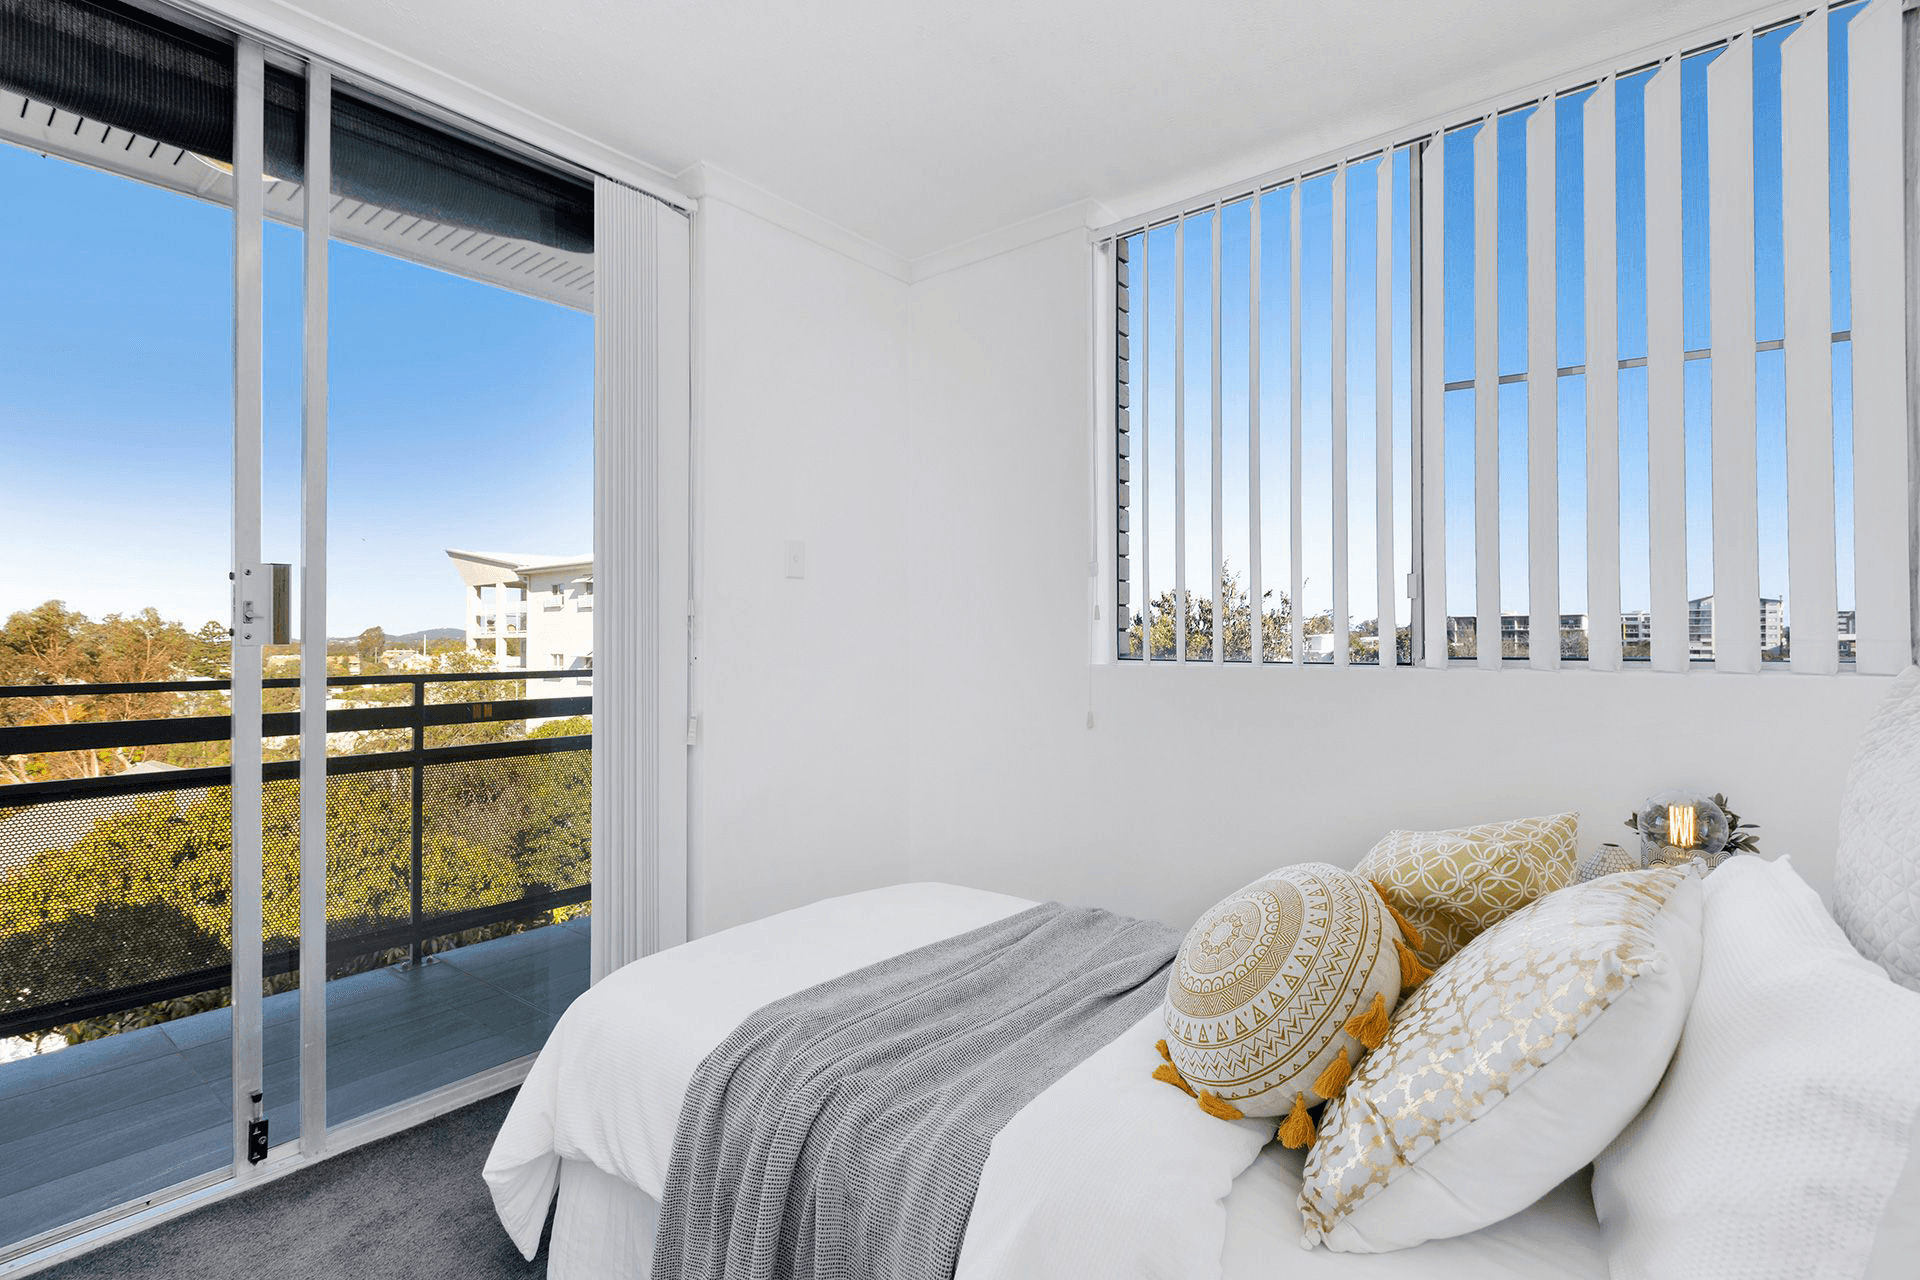 8/12 Underhill Ave, Indooroopilly, QLD 4068